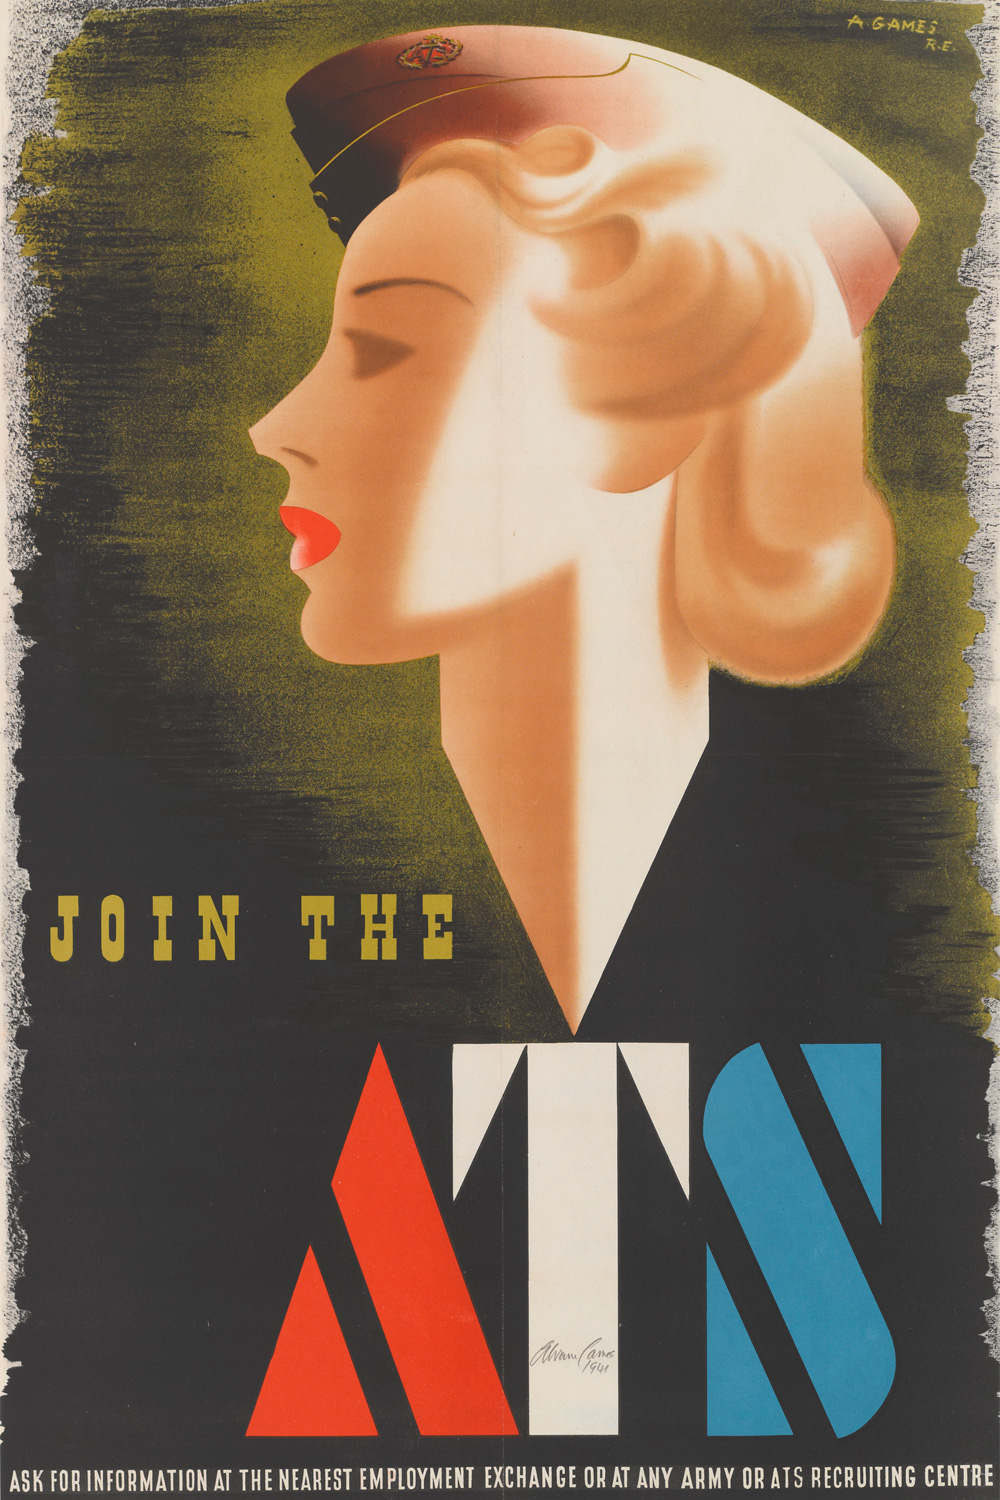 ‘Join the ATS’, recruiting poster, 1941